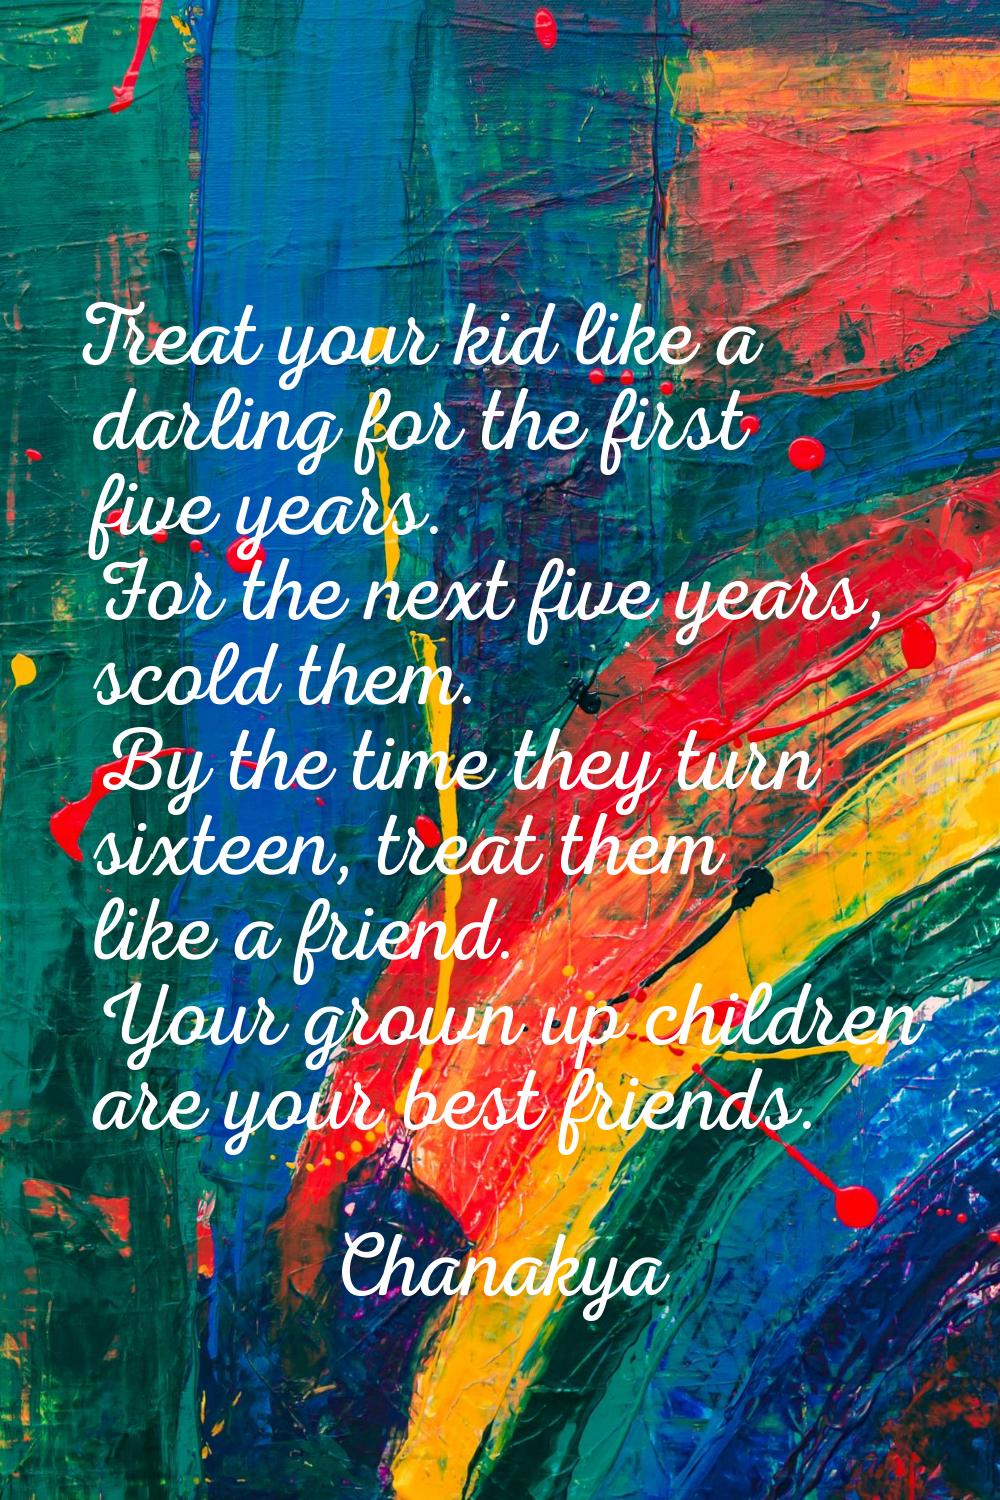 Treat your kid like a darling for the first five years. For the next five years, scold them. By the